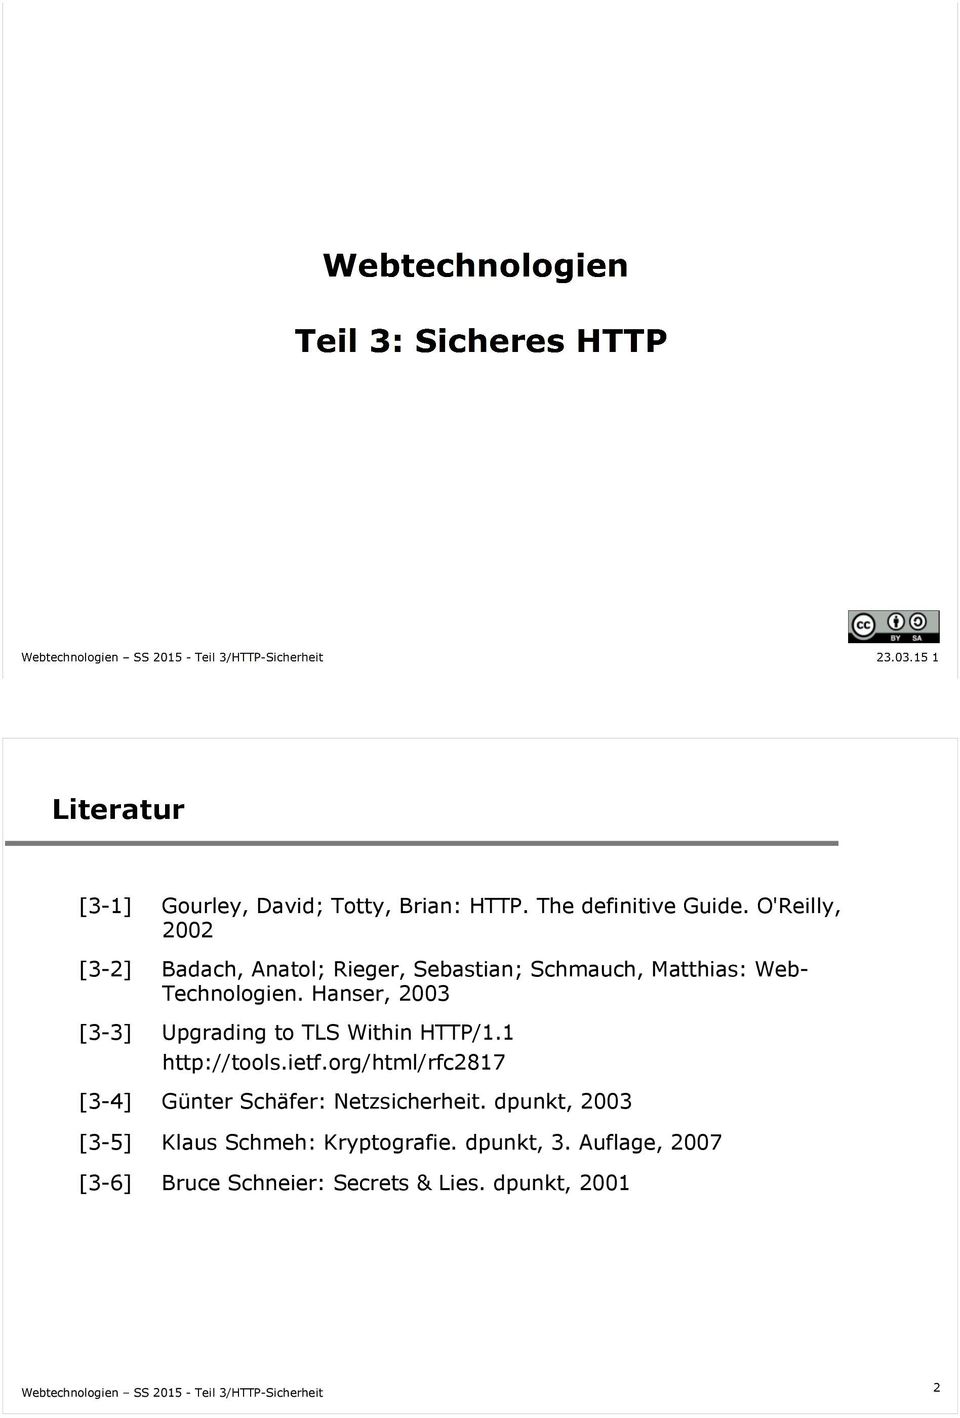 Hanser, 2003 [3-3] Upgrading to TLS Within HTTP/1.1 http://tools.ietf.